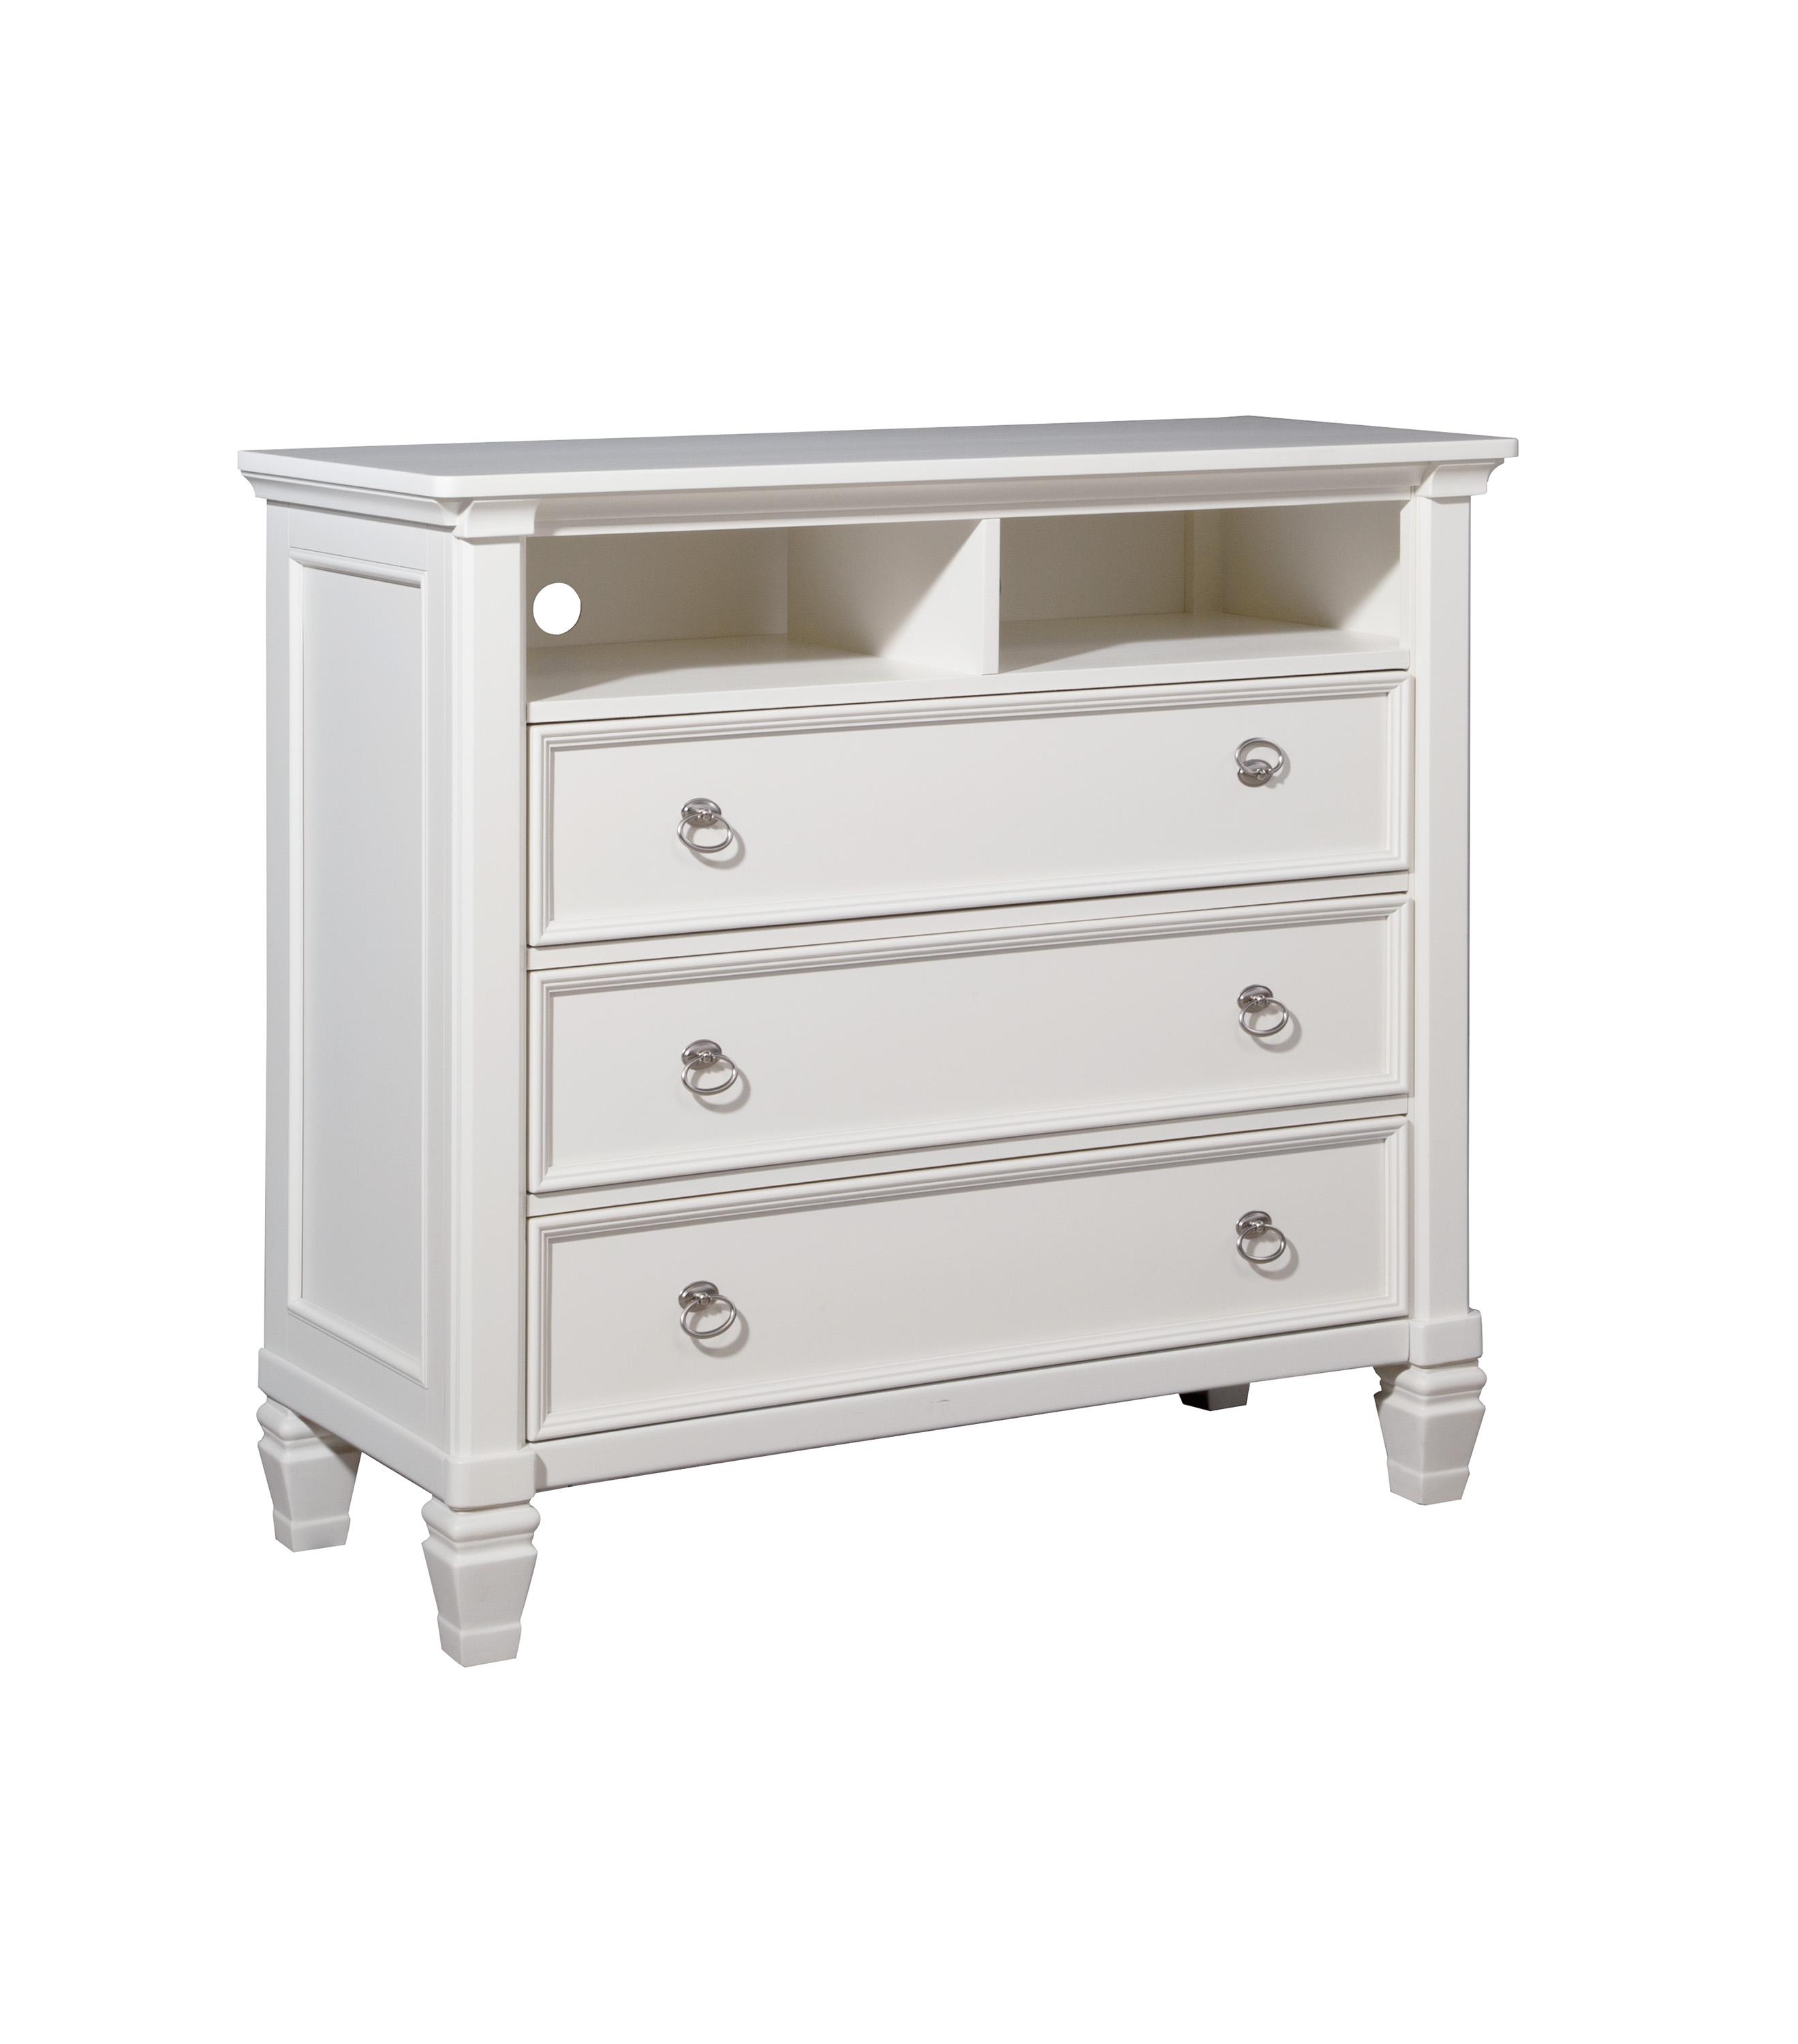 Oak Grey White King Sets Full Size Dresser Ashley Final Sale Bed Clearance  Queen Piece Home Furniture - China Nolte Bedroom Furniture, Next Bedroom  Furniture Clearance